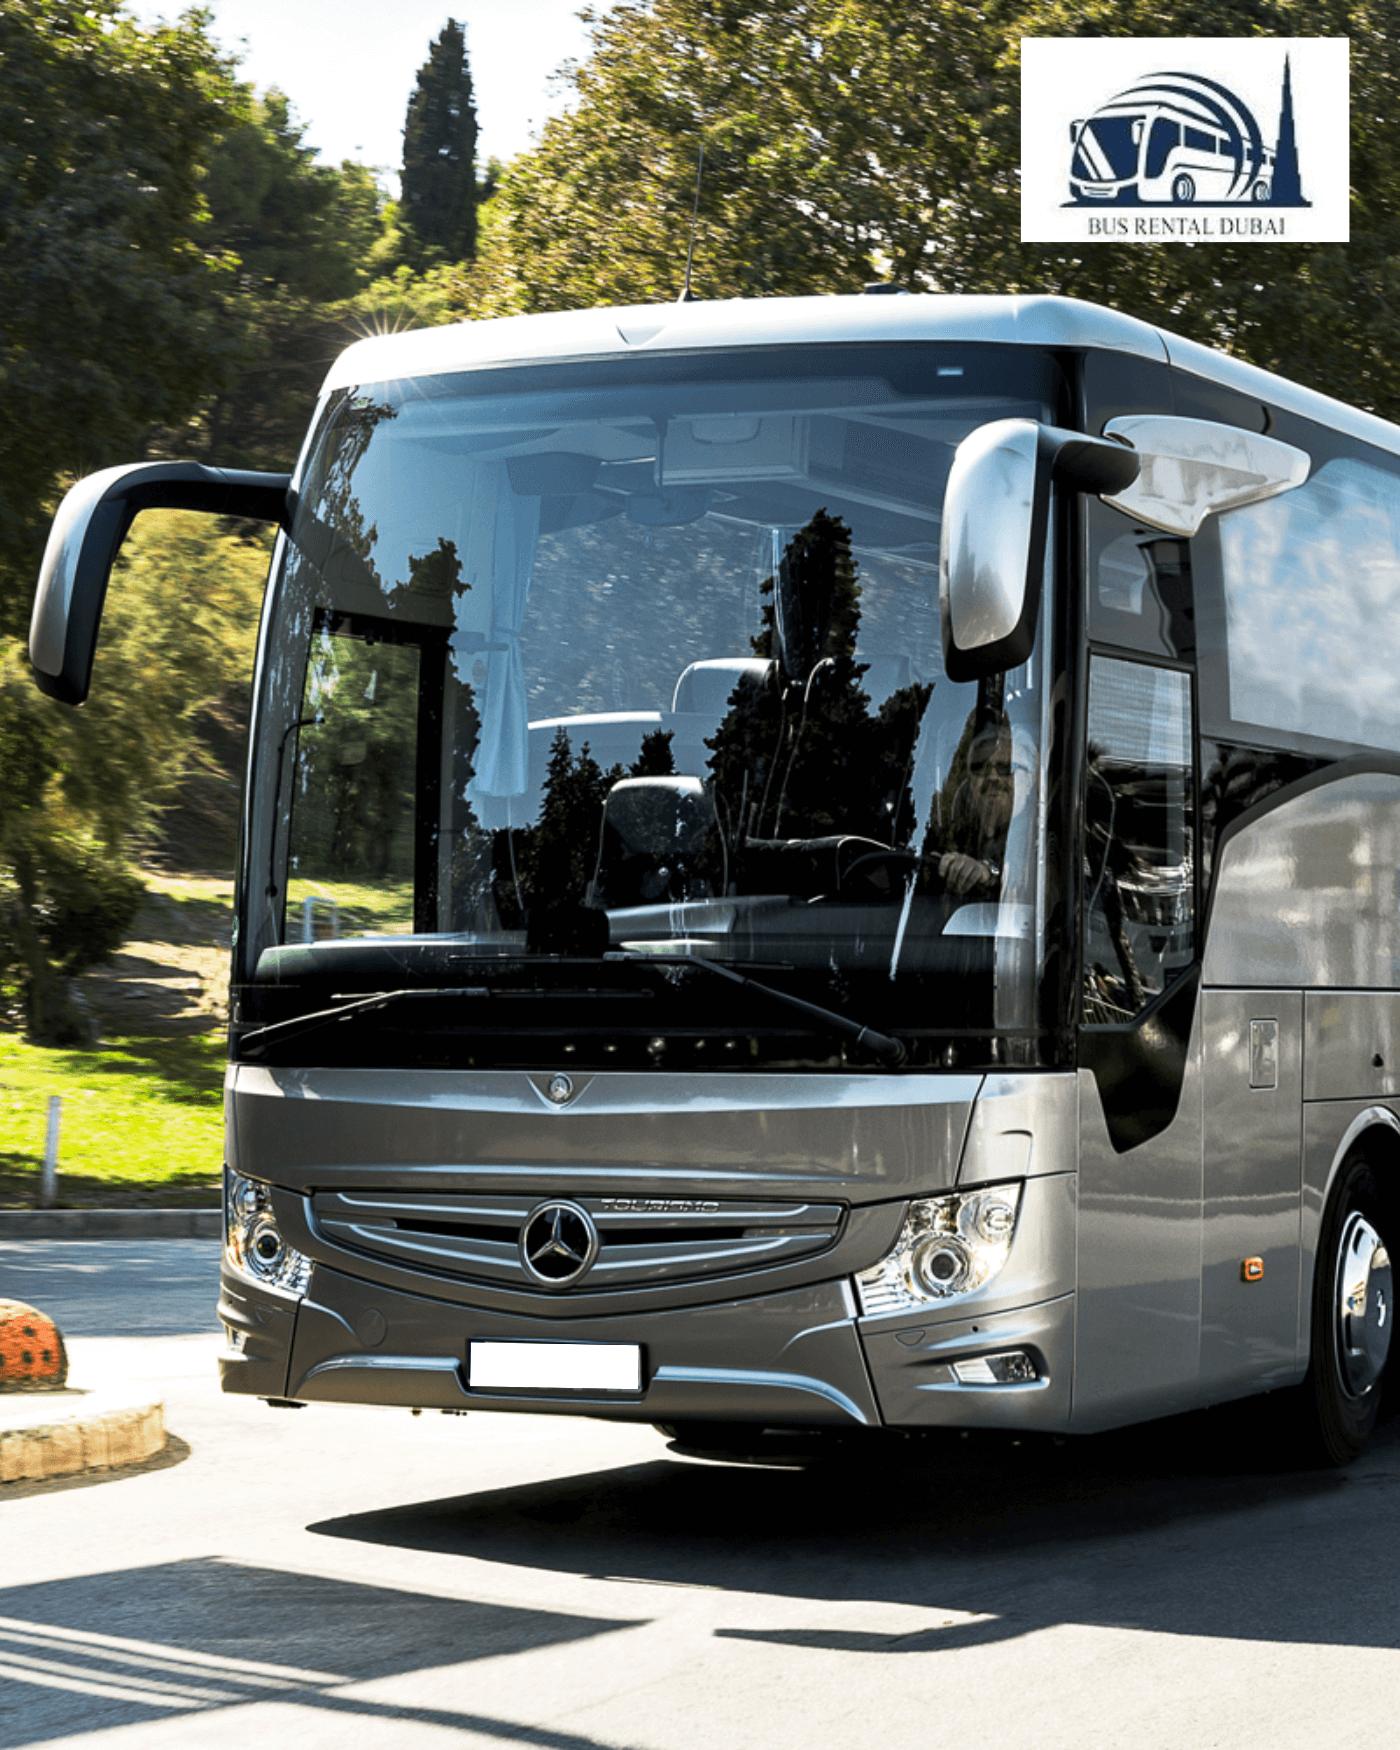 Premium Bus Rental Dubai With Driver - Experience Comfort and Convenience